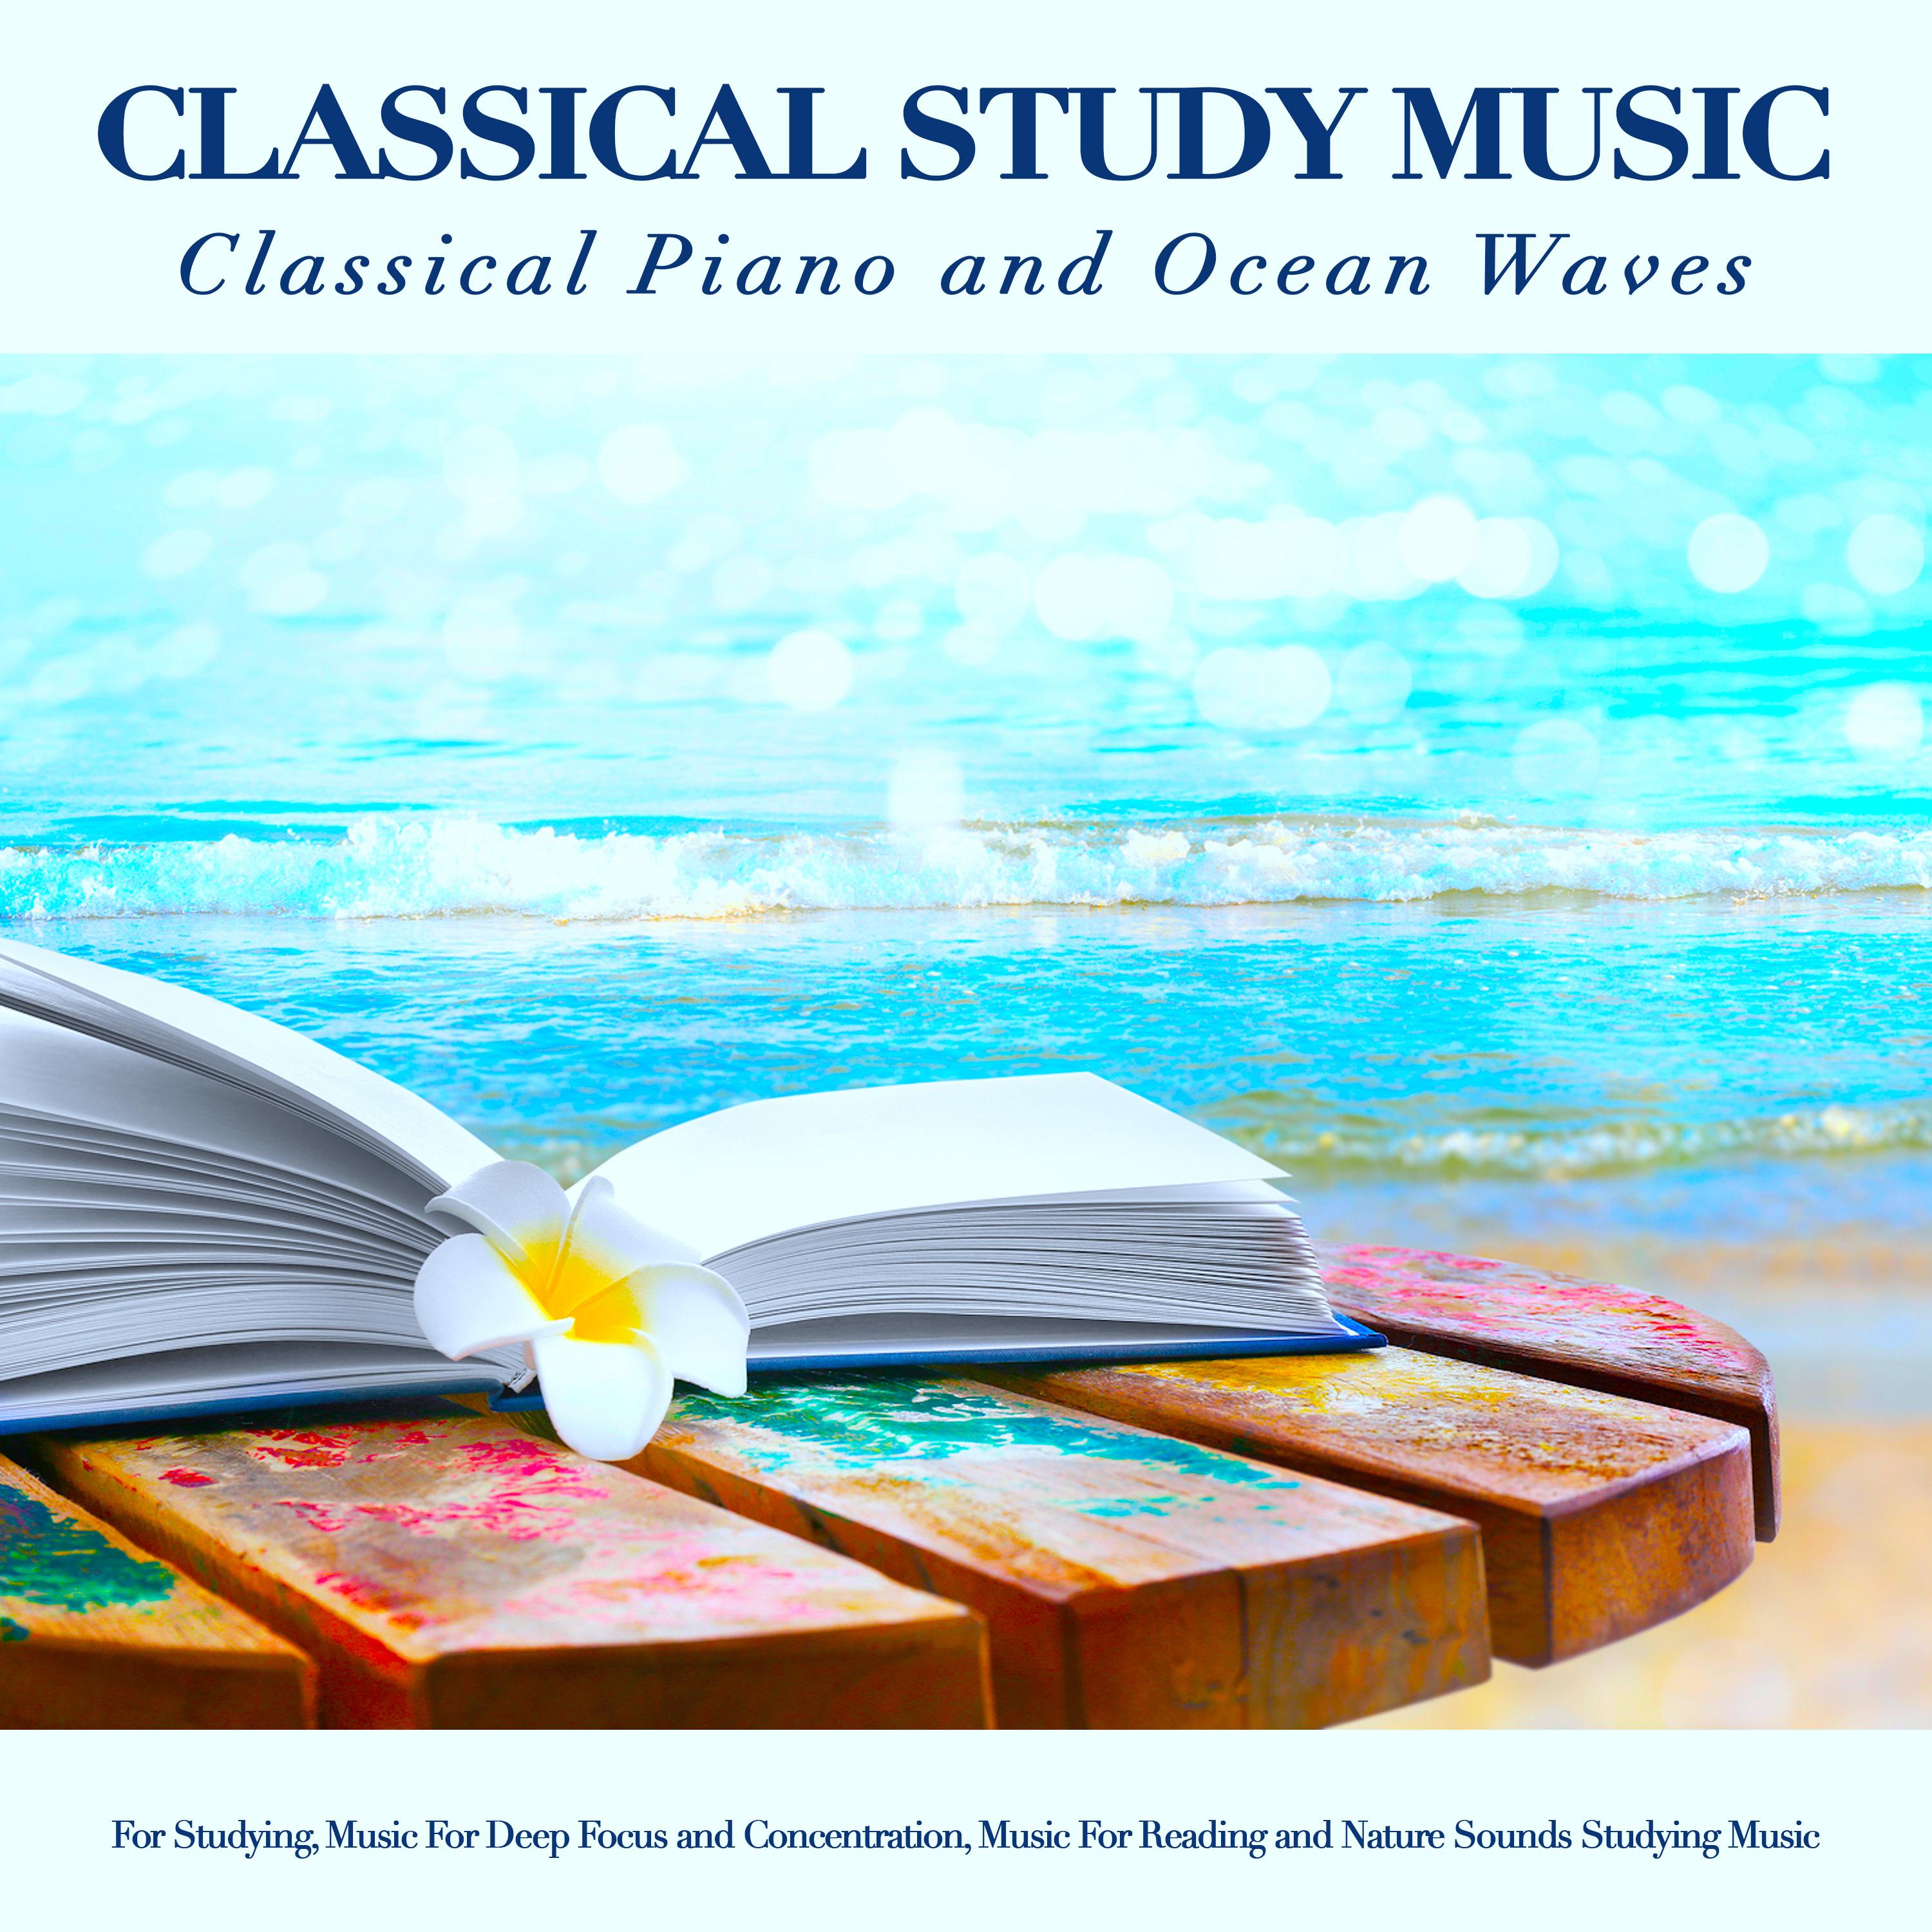 Sugar Plum Fairy - Tchaikovsky - Classical Study Music - Ocean Waves Sounds - Classical Piano for Studying